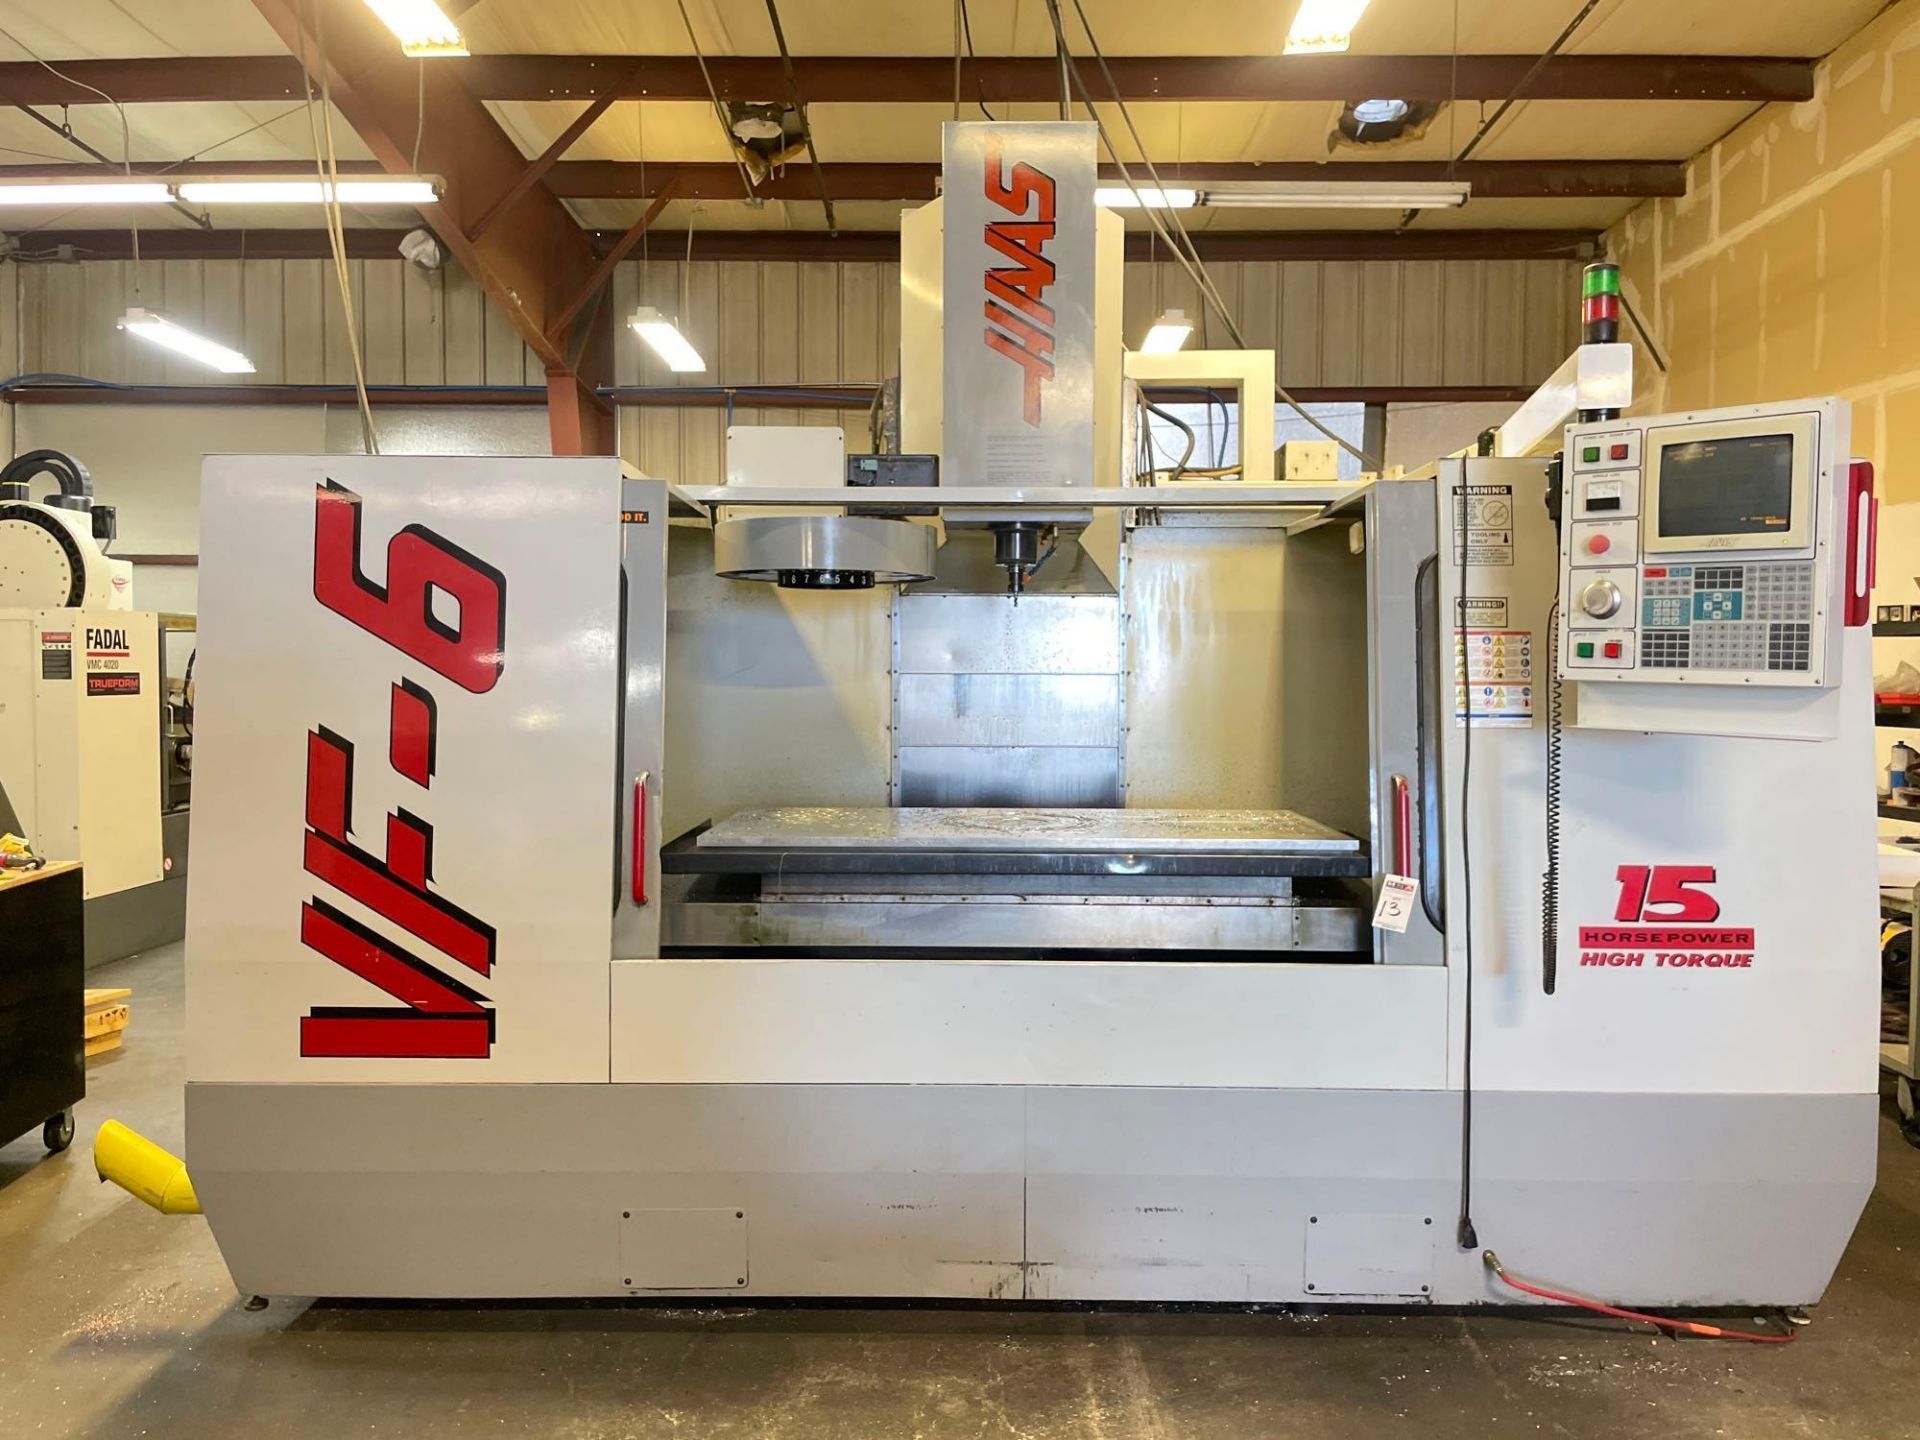 Haas VF-6 4-Axis Ready Vertical Machining Center, 64” x 32” x 30” Trvls., CT40, 20 ATC, New 1997 - Image 3 of 10